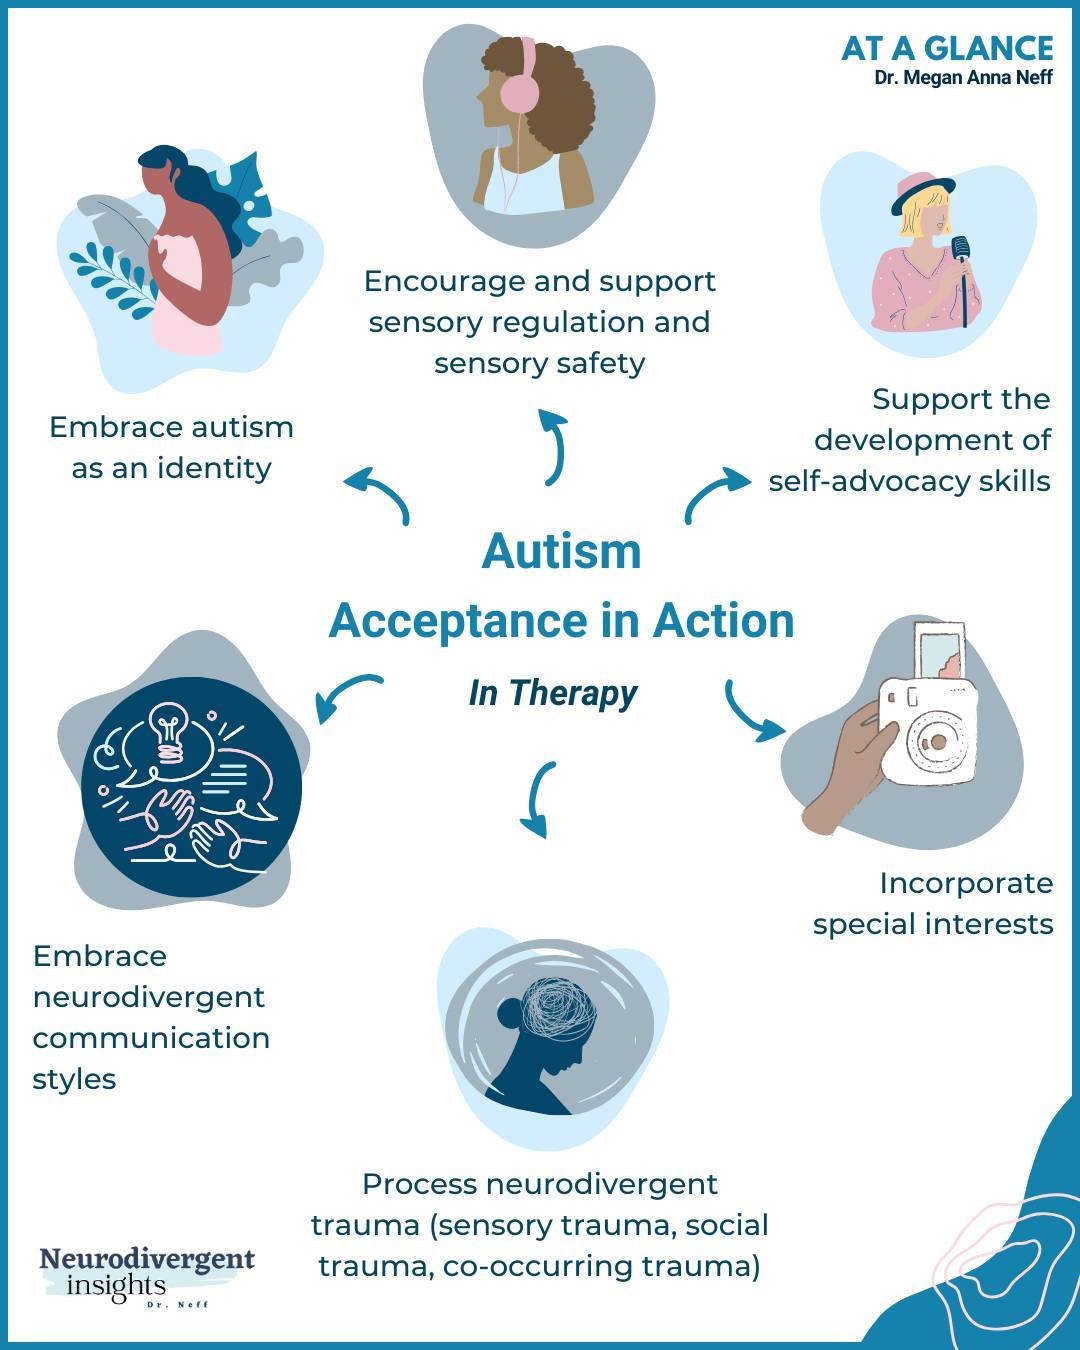 #ConcreteAcceptance: Day 4 of 7 - Autism Inclusion in Therapy⁠
⁠
Therapeutic spaces can profoundly influence autistic people's well-being. The majority of us have mental health issues, but it can be hard to find a therapist that understands how to su